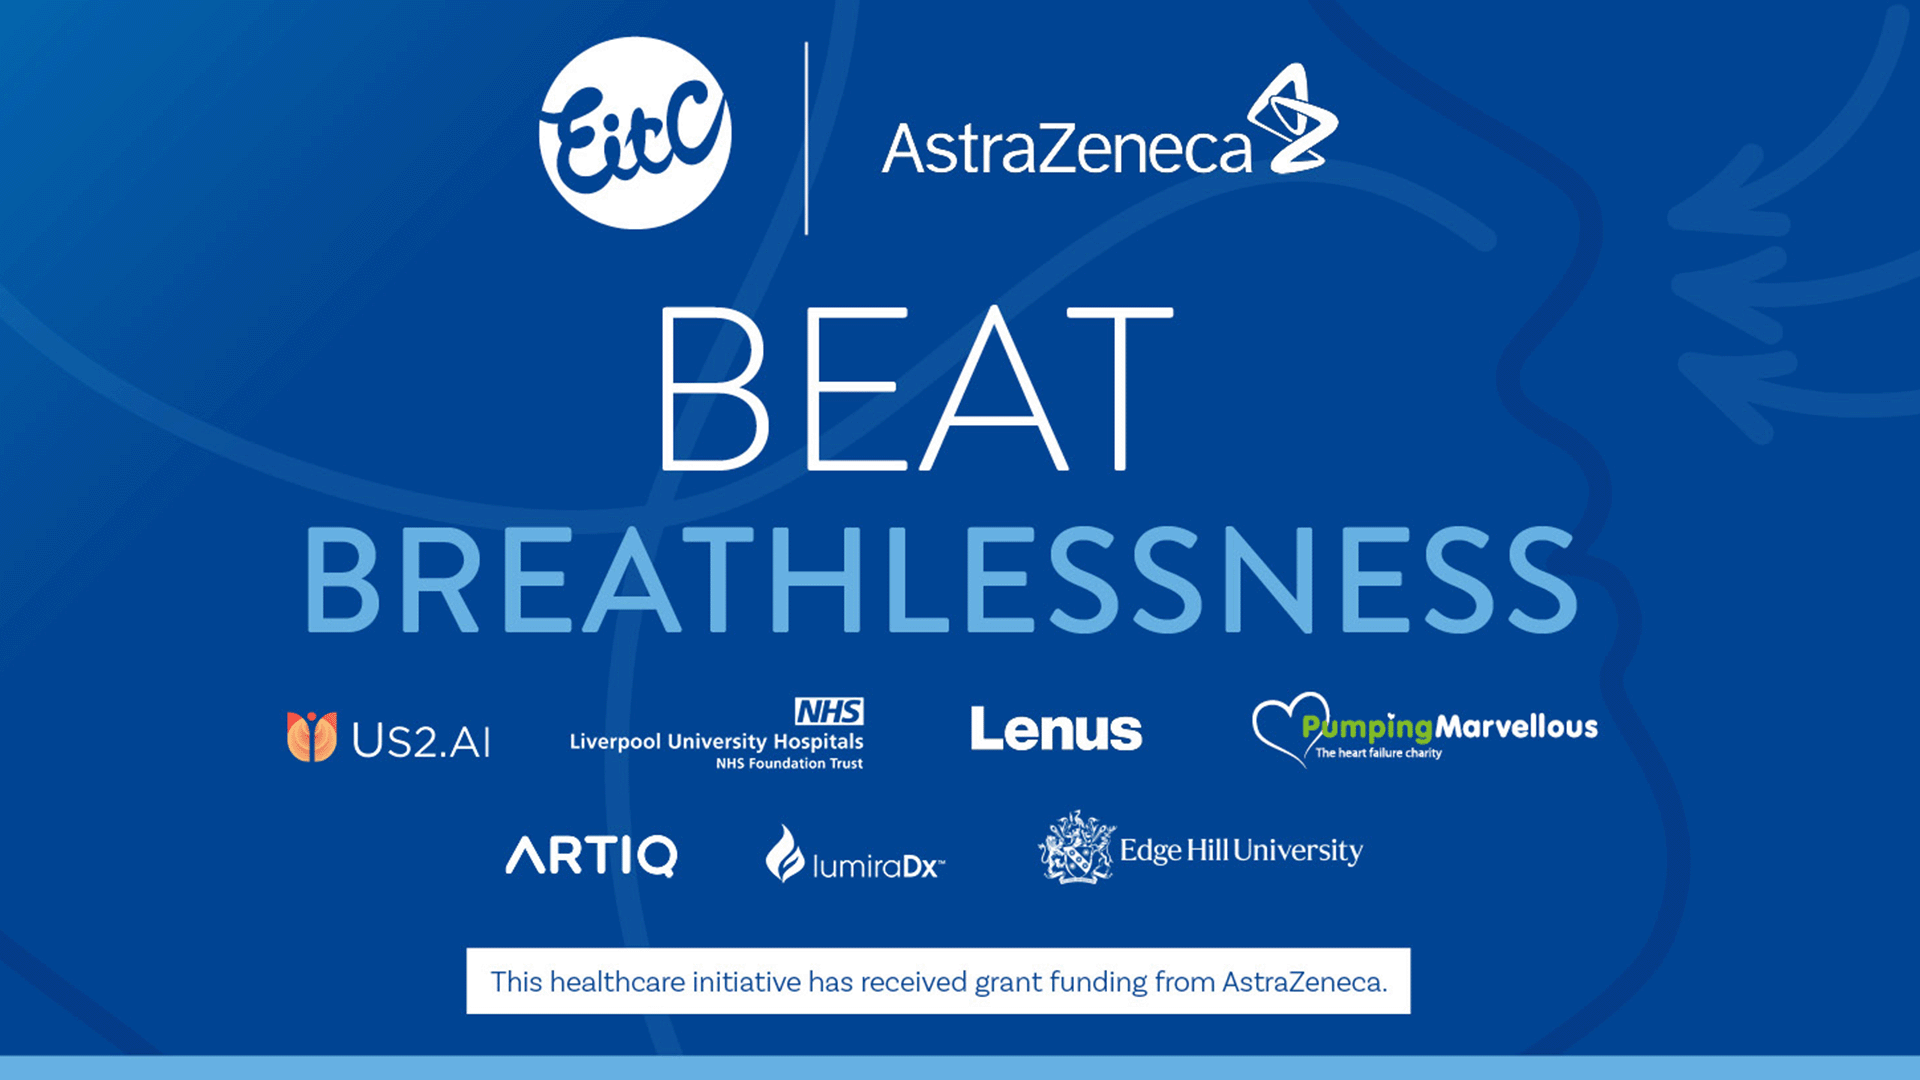 EitC Teams Up With AstraZeneca To Launch England’s First Community-Based Heart And Lung Screening Hub